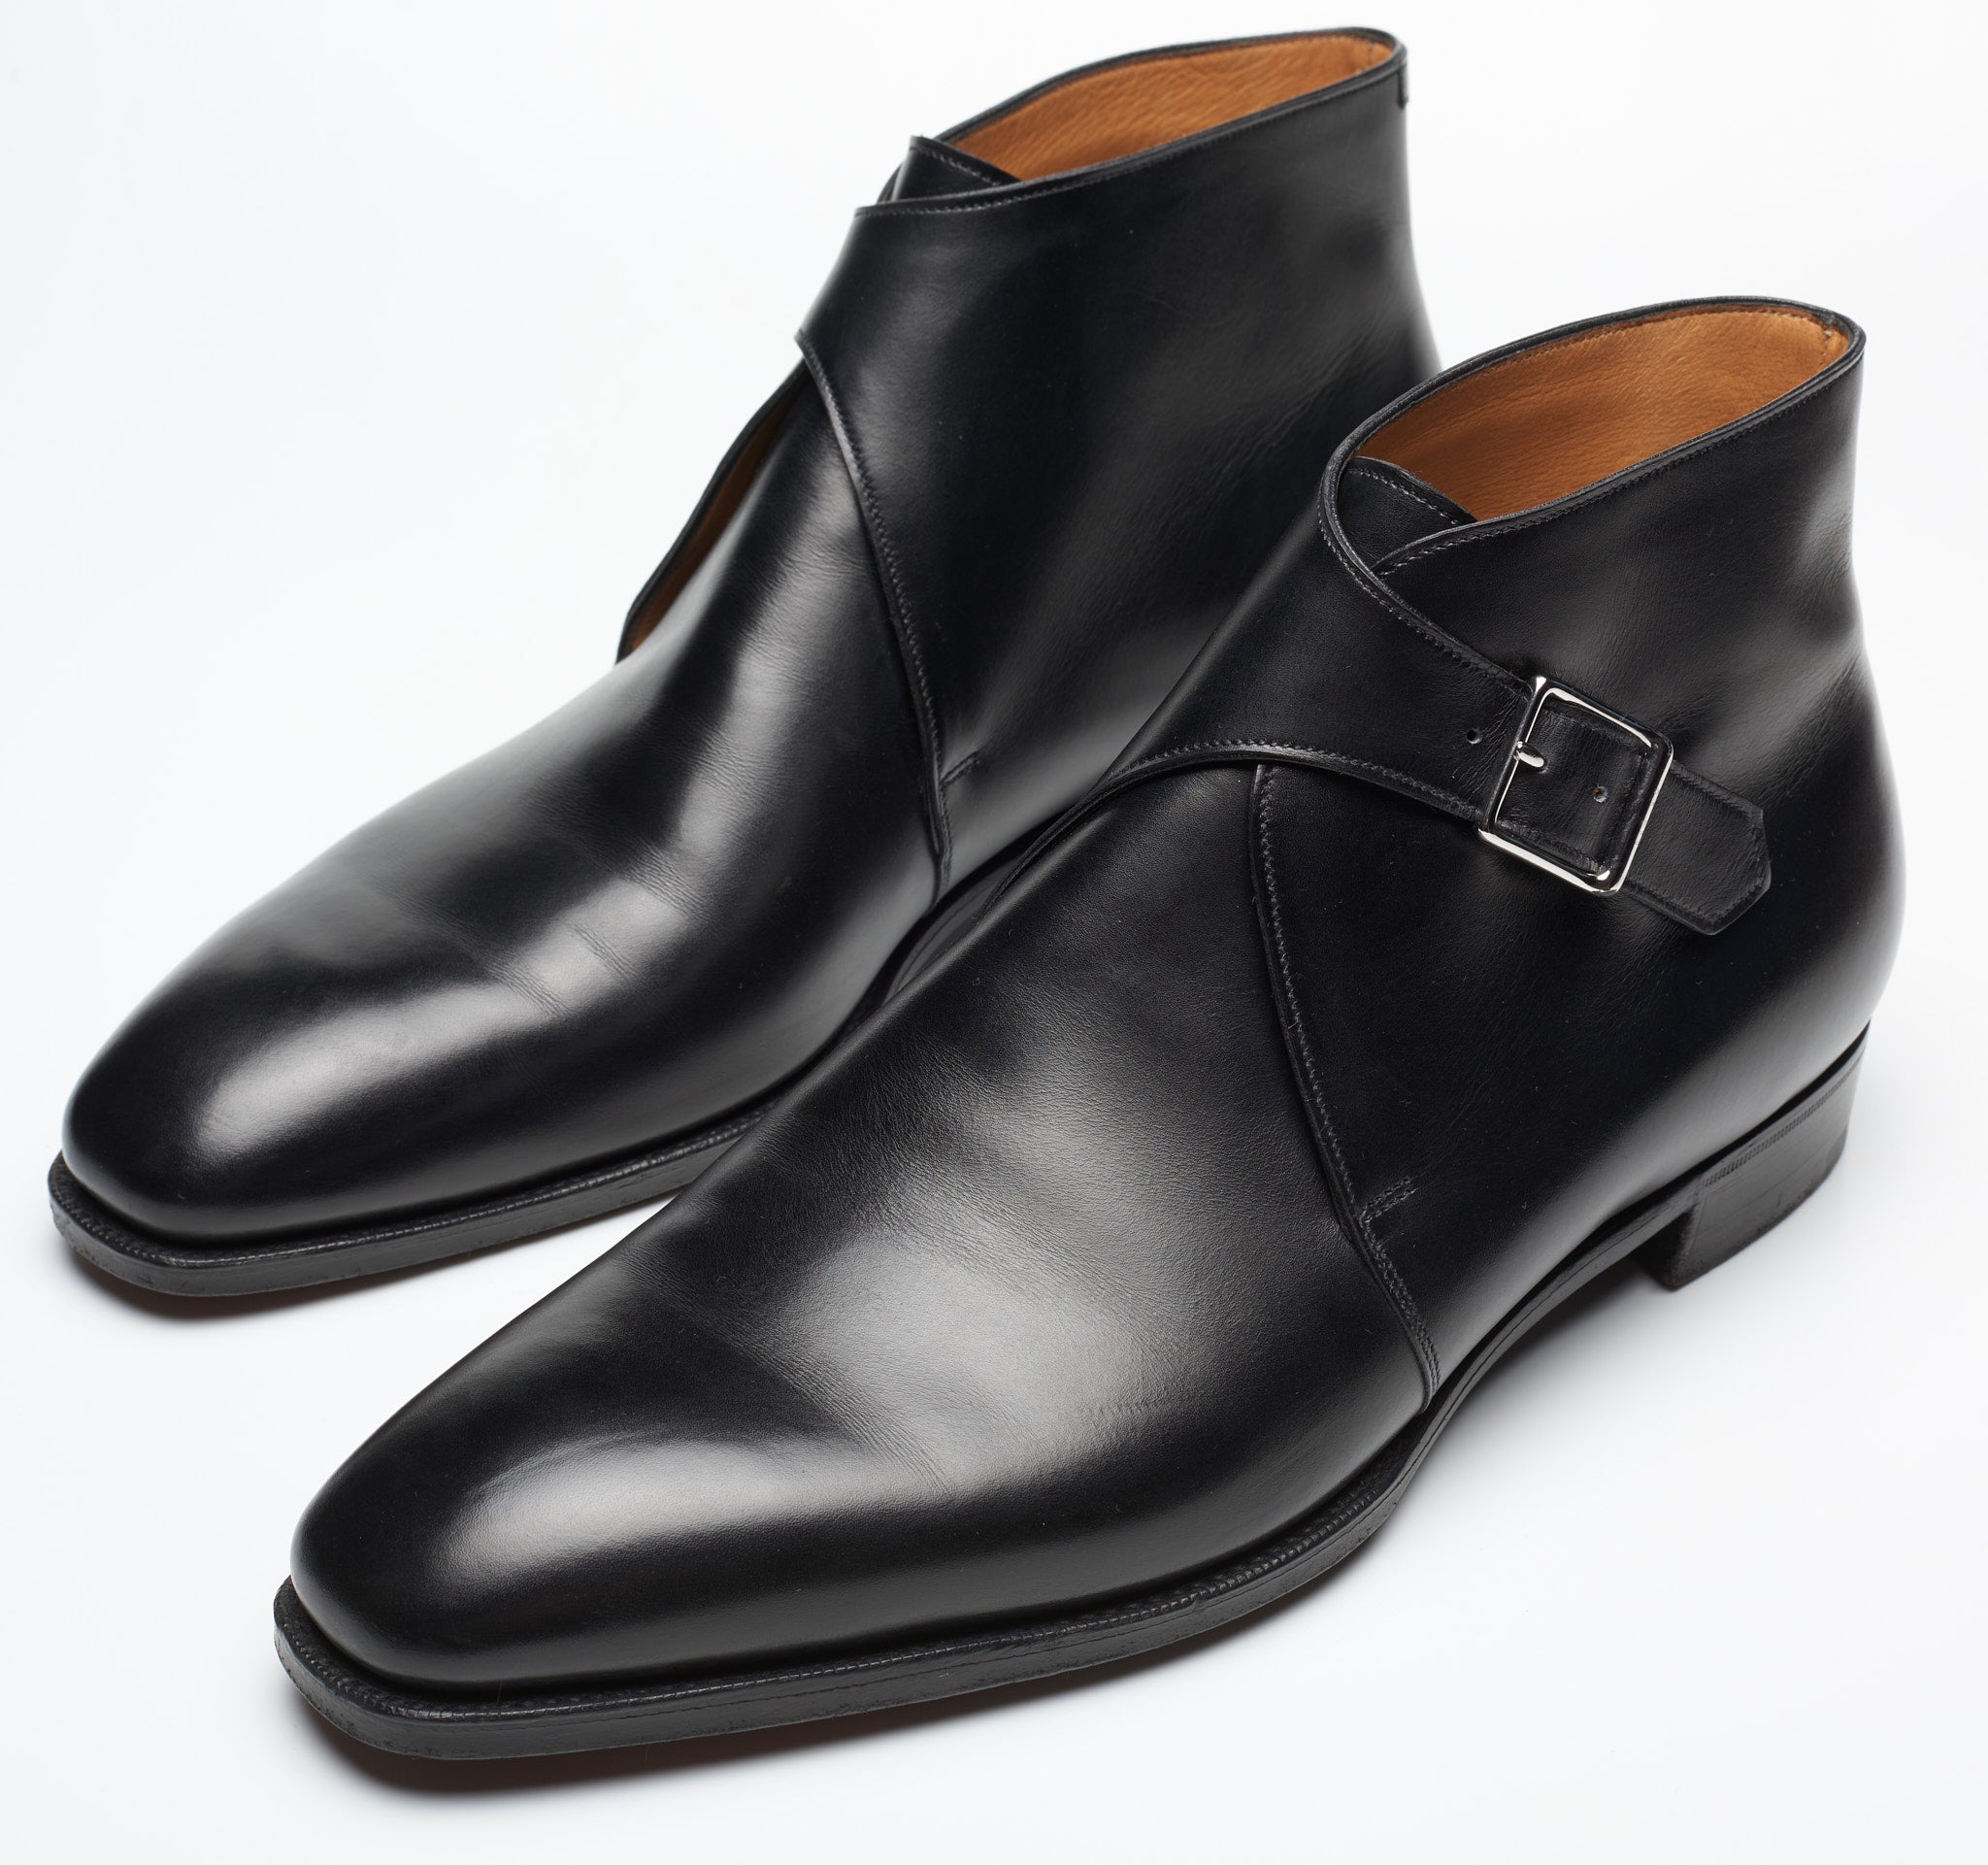 GAZIANO & GIRLING "Cotswold" Black Leather Single Monk Chukka Boots 8E US 8.5 Last MH71 GAZIANO & GIRLING